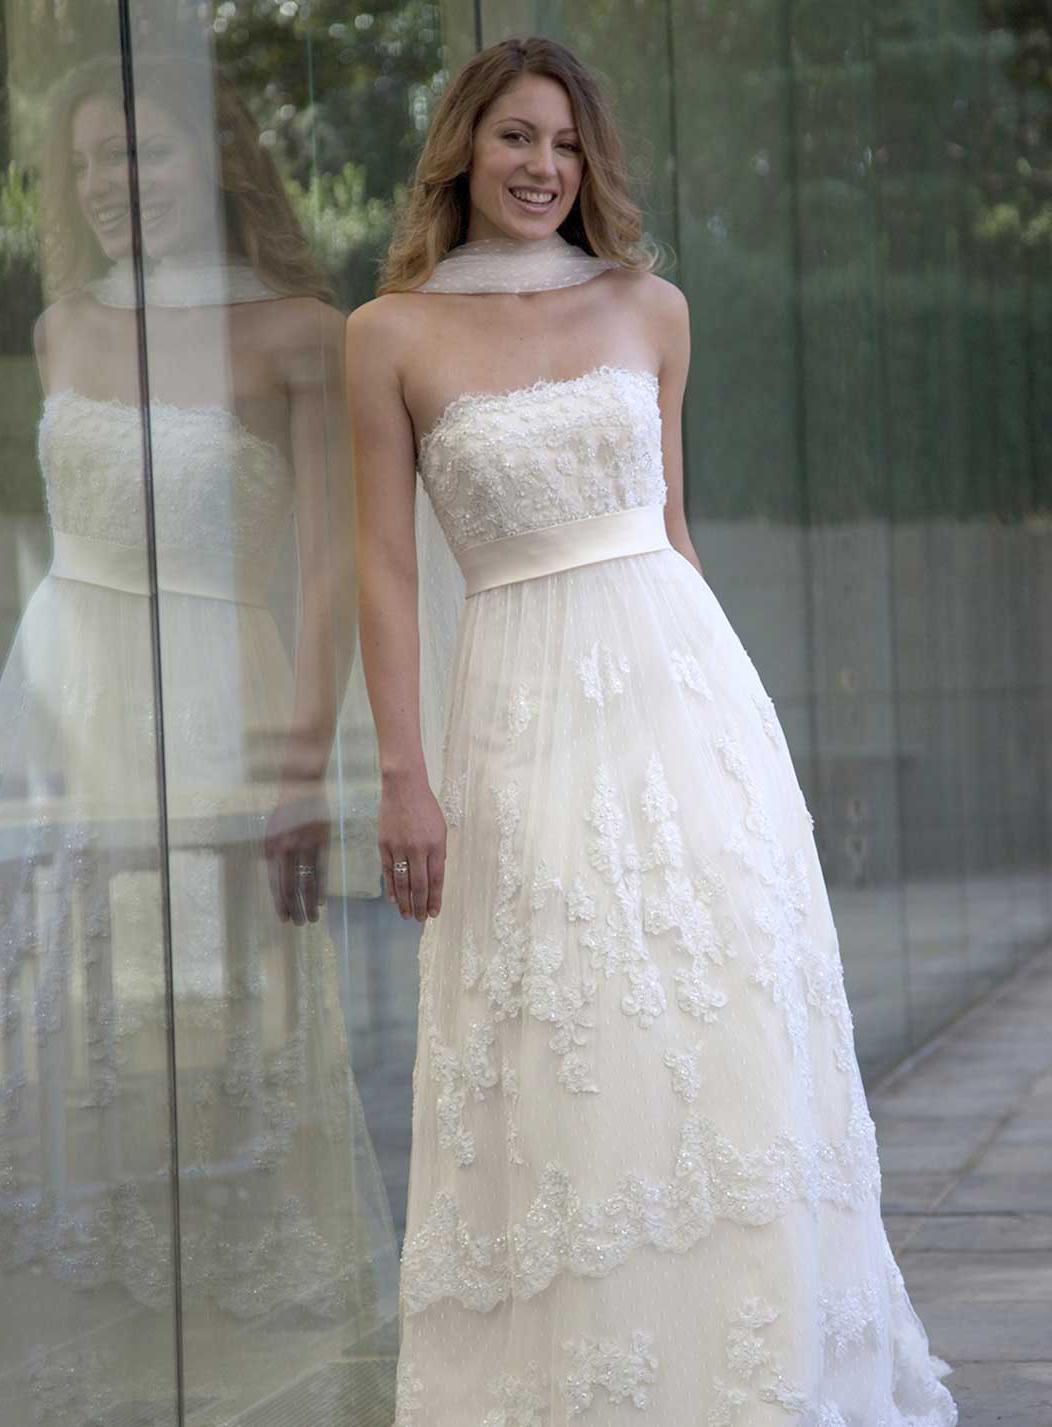 Strapless lace wedding gowns